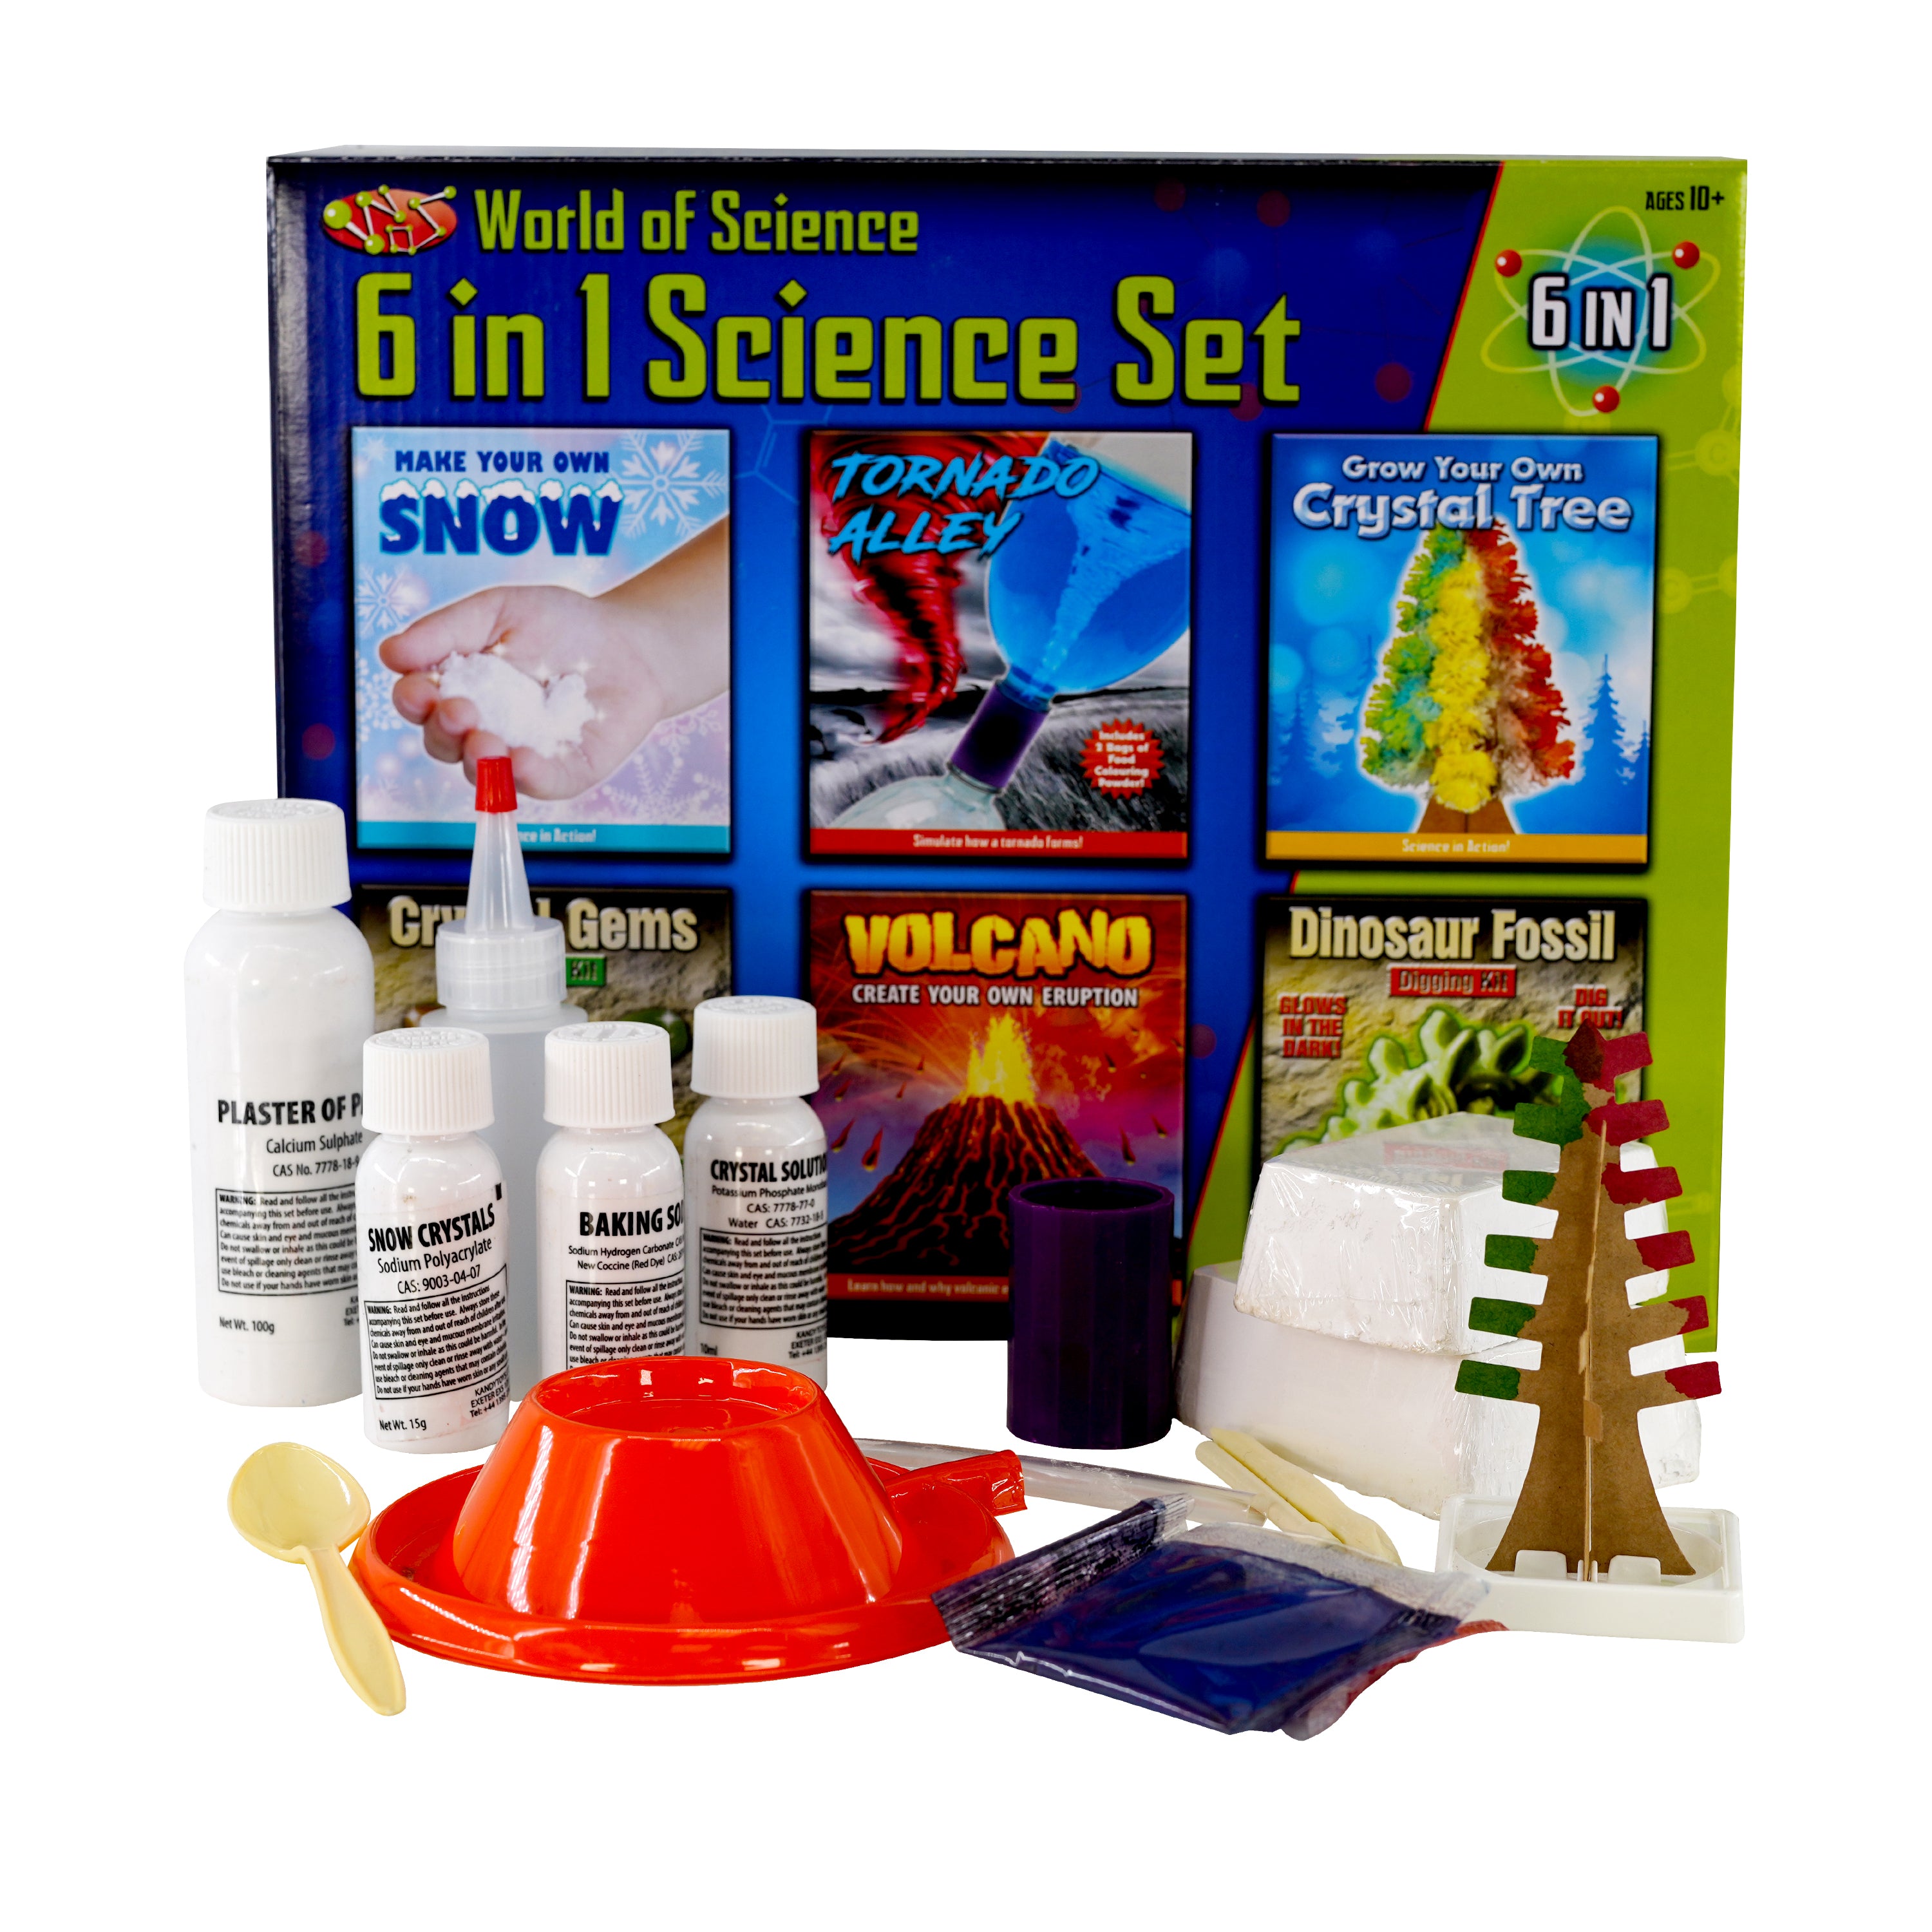 MYO 6 in 1 Science Set The Magic Toy Shop - The Magic Toy Shop